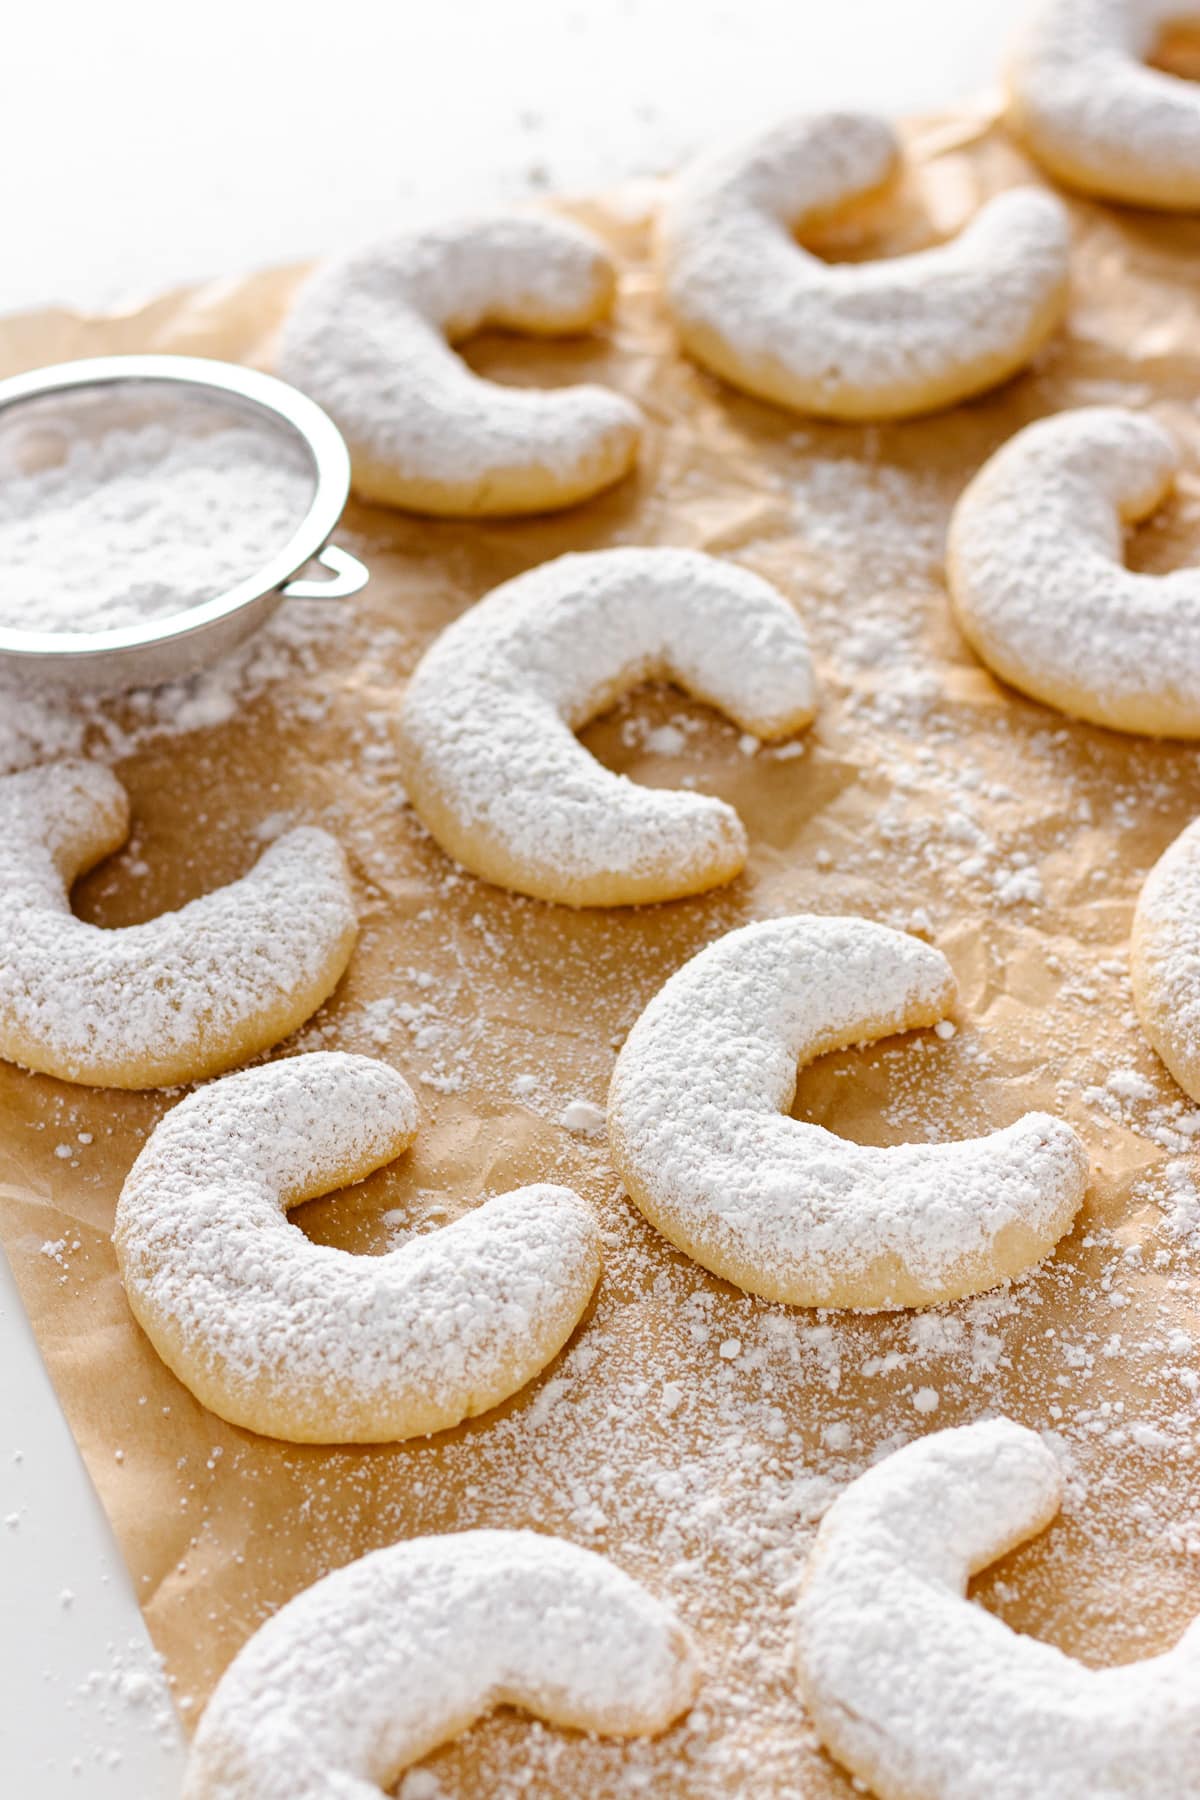 Powdered sugar dusted crescent cookies on a sheet of parchment paper.